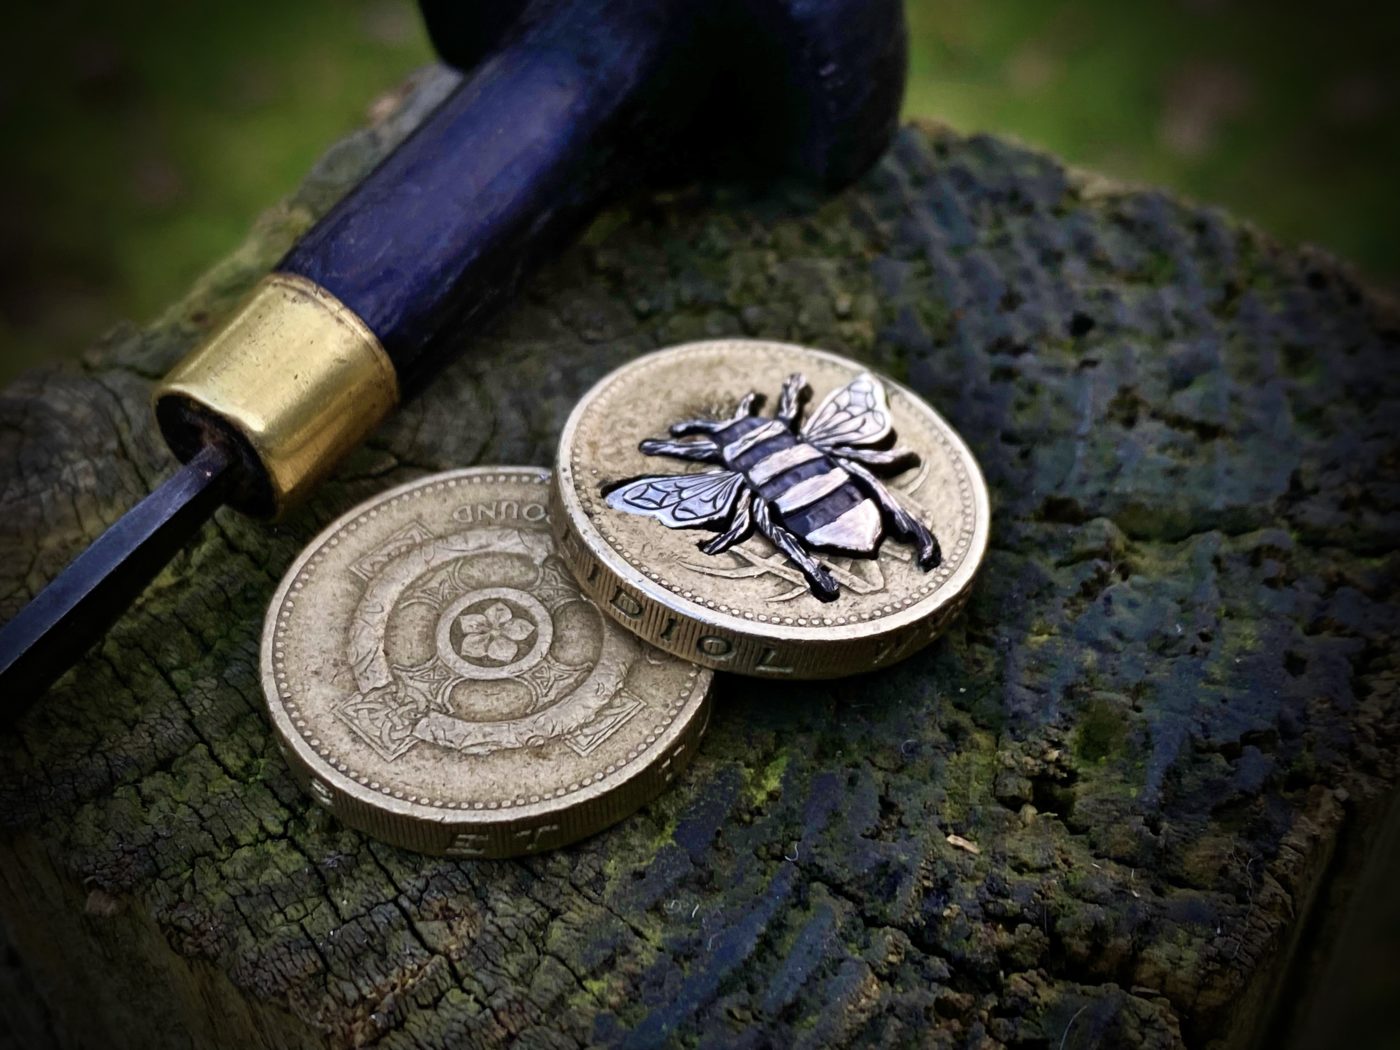 Bee jewellery handmade, handcrafted and completely recycled from old out of circulation coins. Each piece is ethically made in Cambridge England